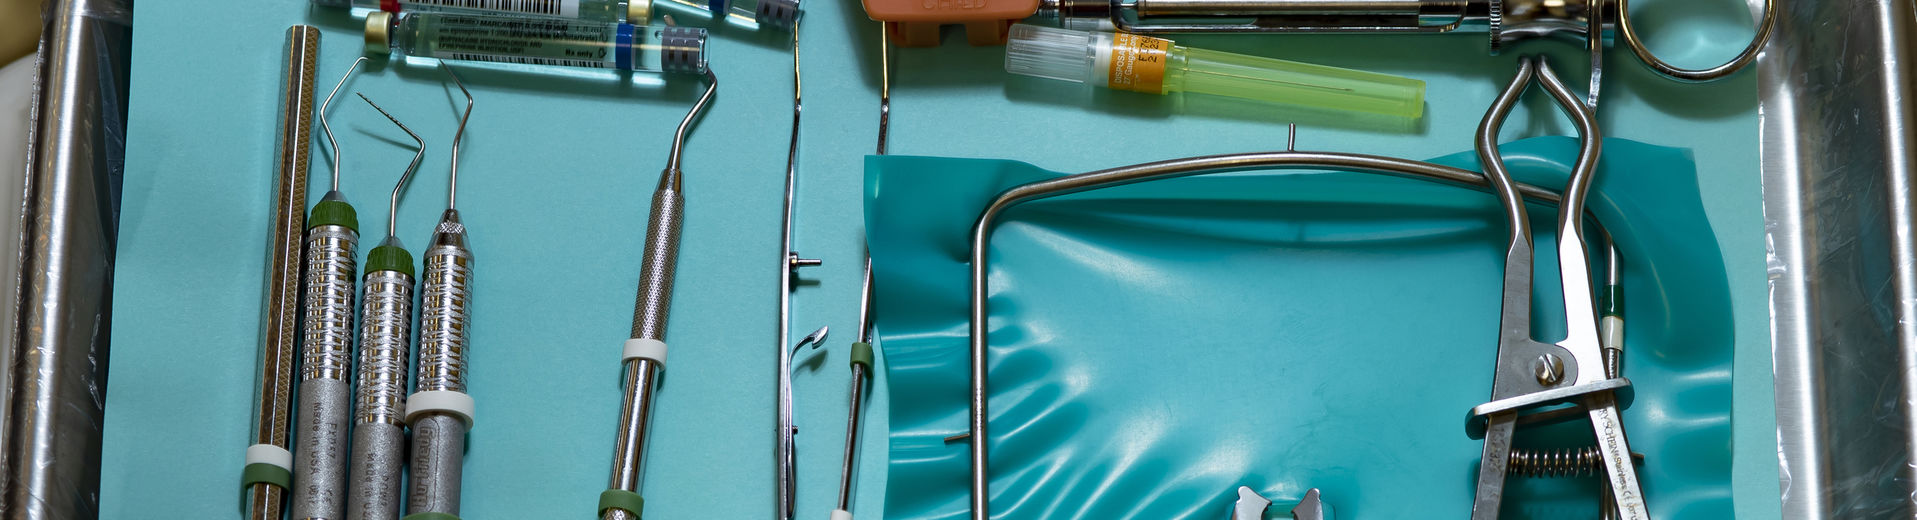 Dentistry tools arranged on a tray